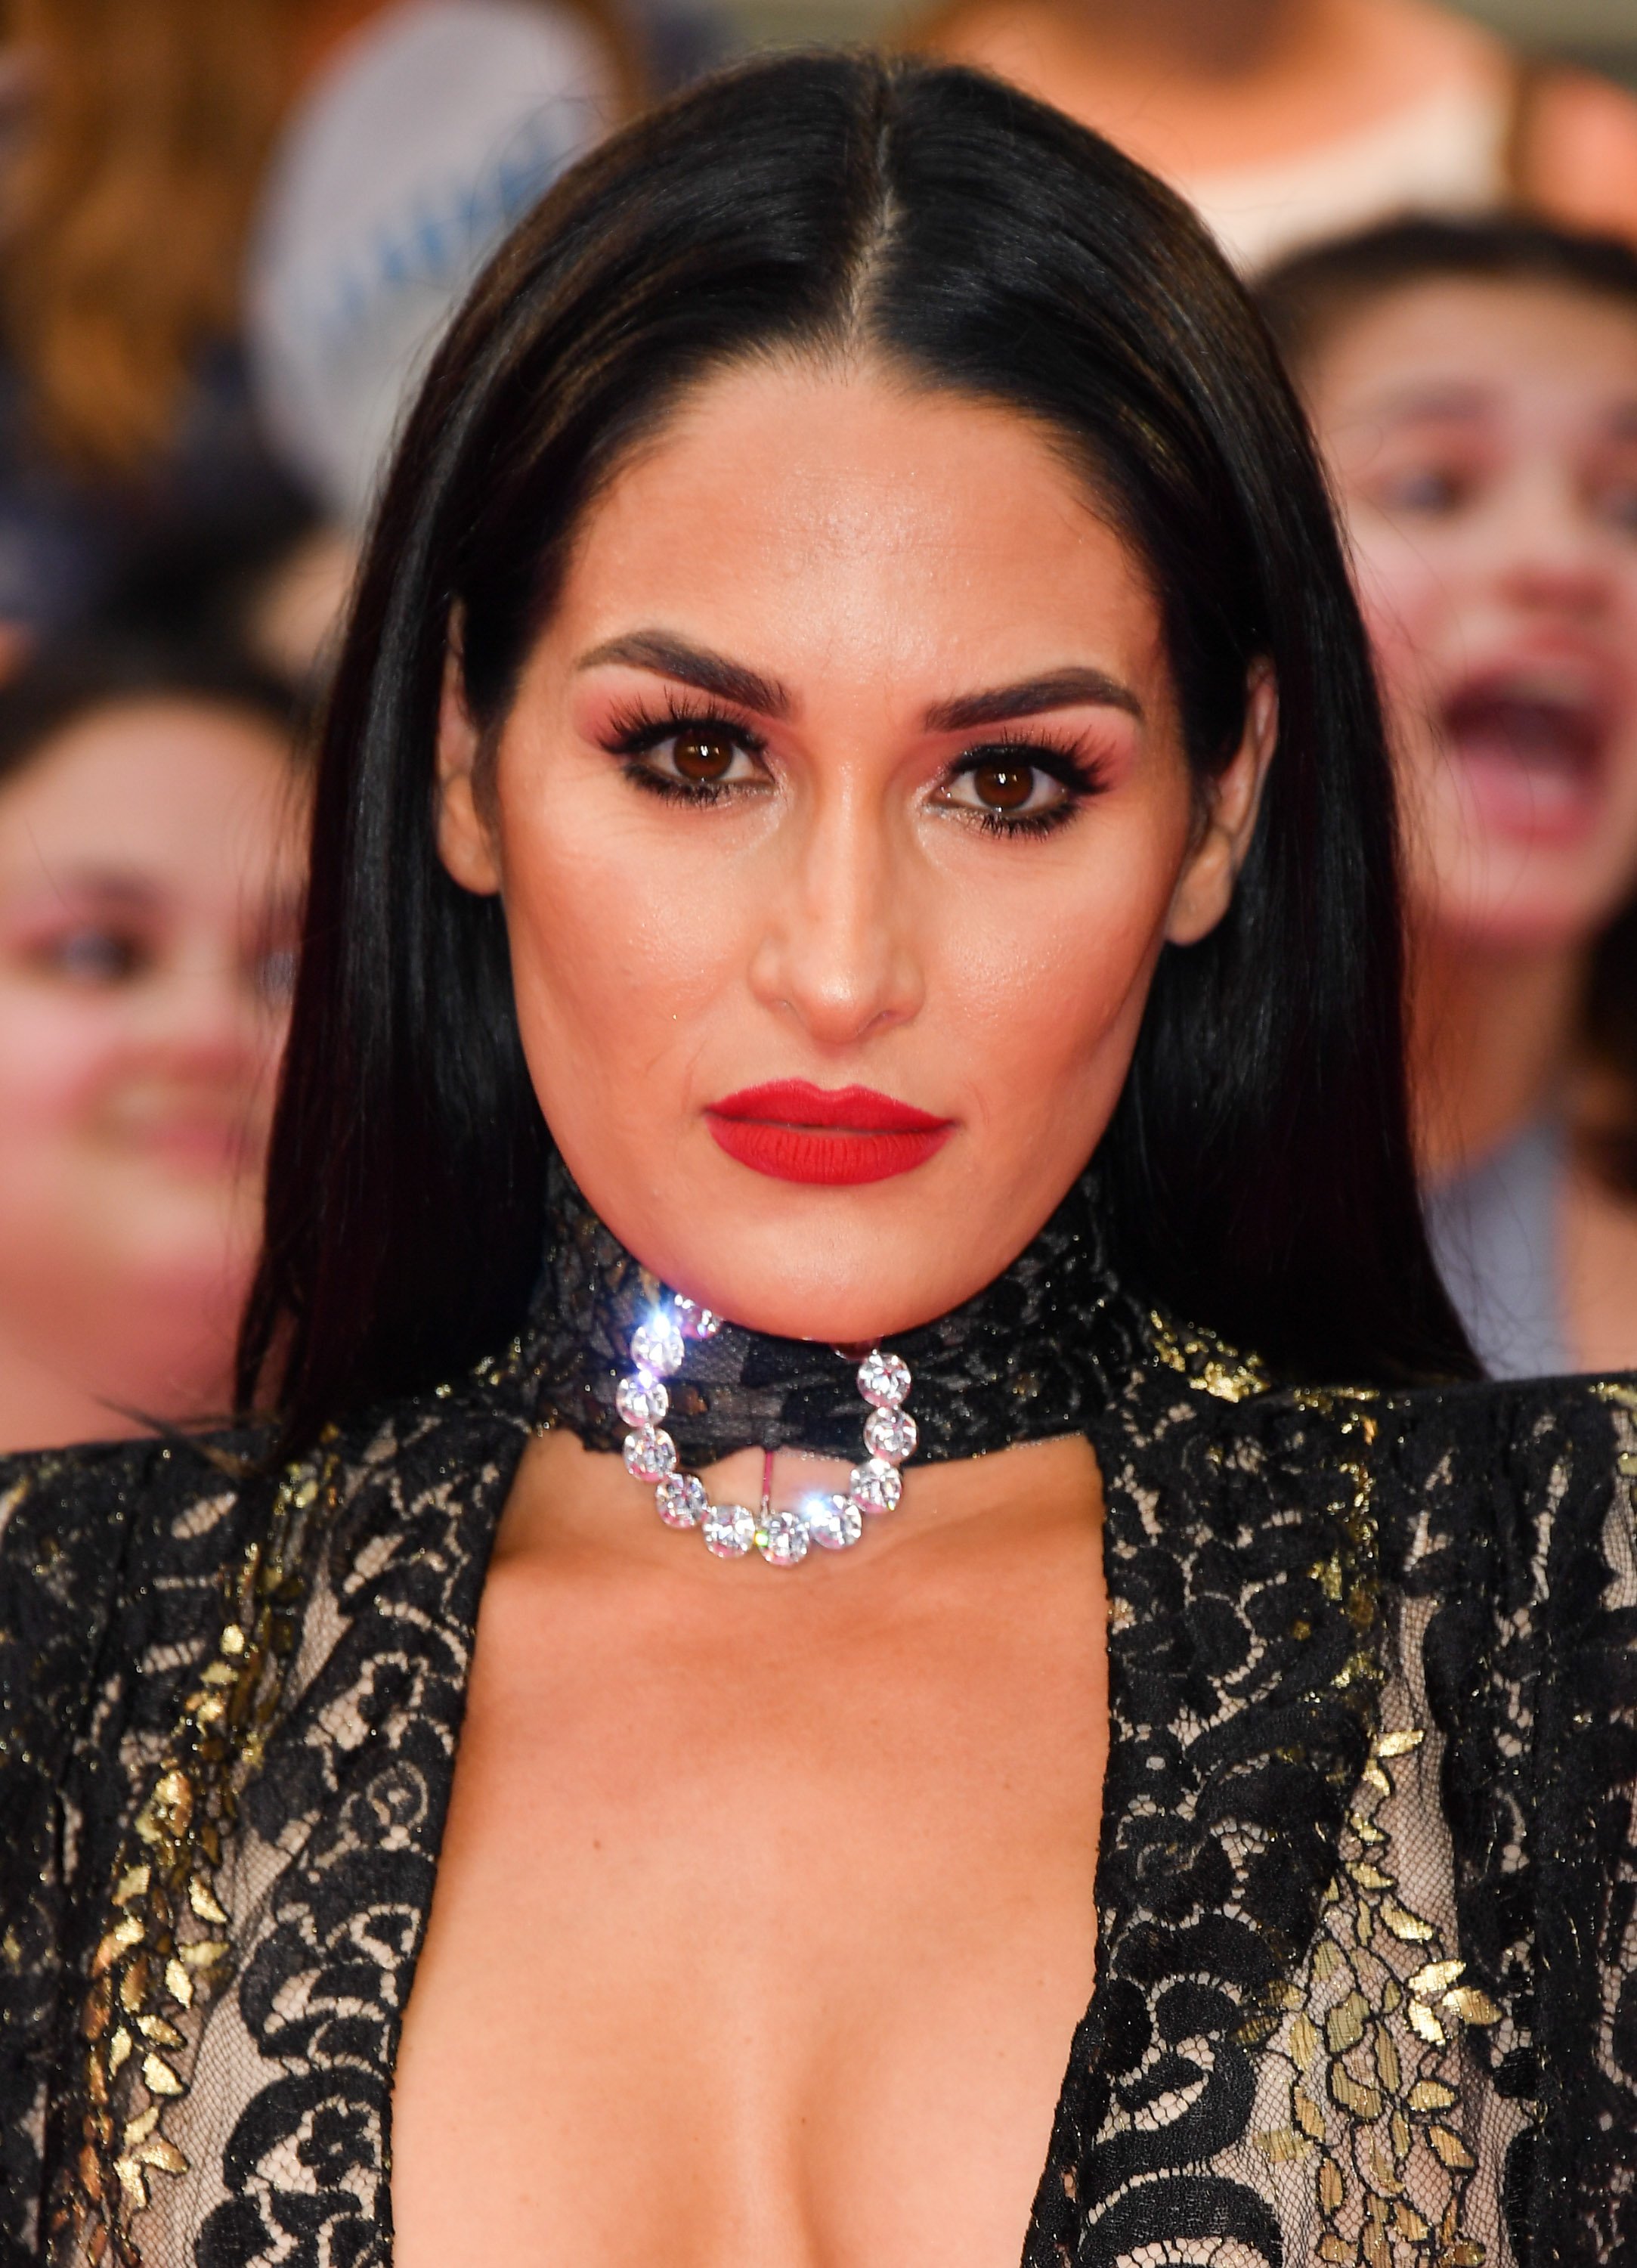 Nikki Bella at the iHeartRADIO MuchMusic Video Awards at MuchMusic HQ on June 18, 2017 in Toronto, Canada. | Source: Getty Images